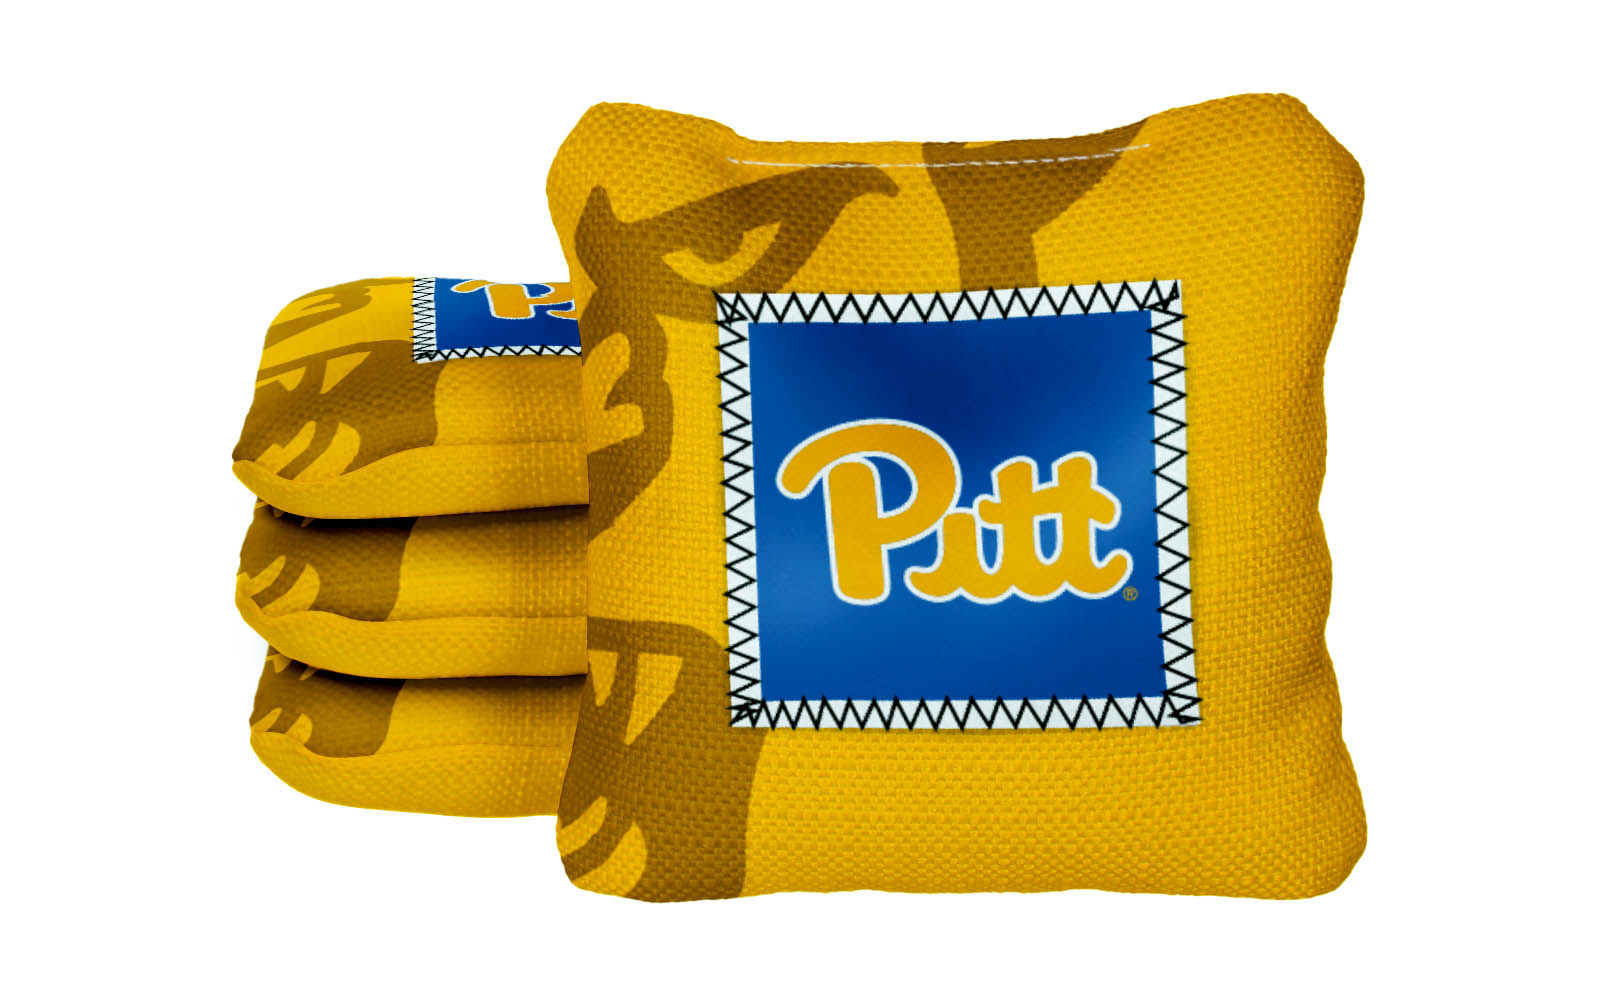 Officially Licensed Collegiate Cornhole Bags - AllCornhole Game Changers Steady 2.0 - Set of 4 - University of Pittsburgh